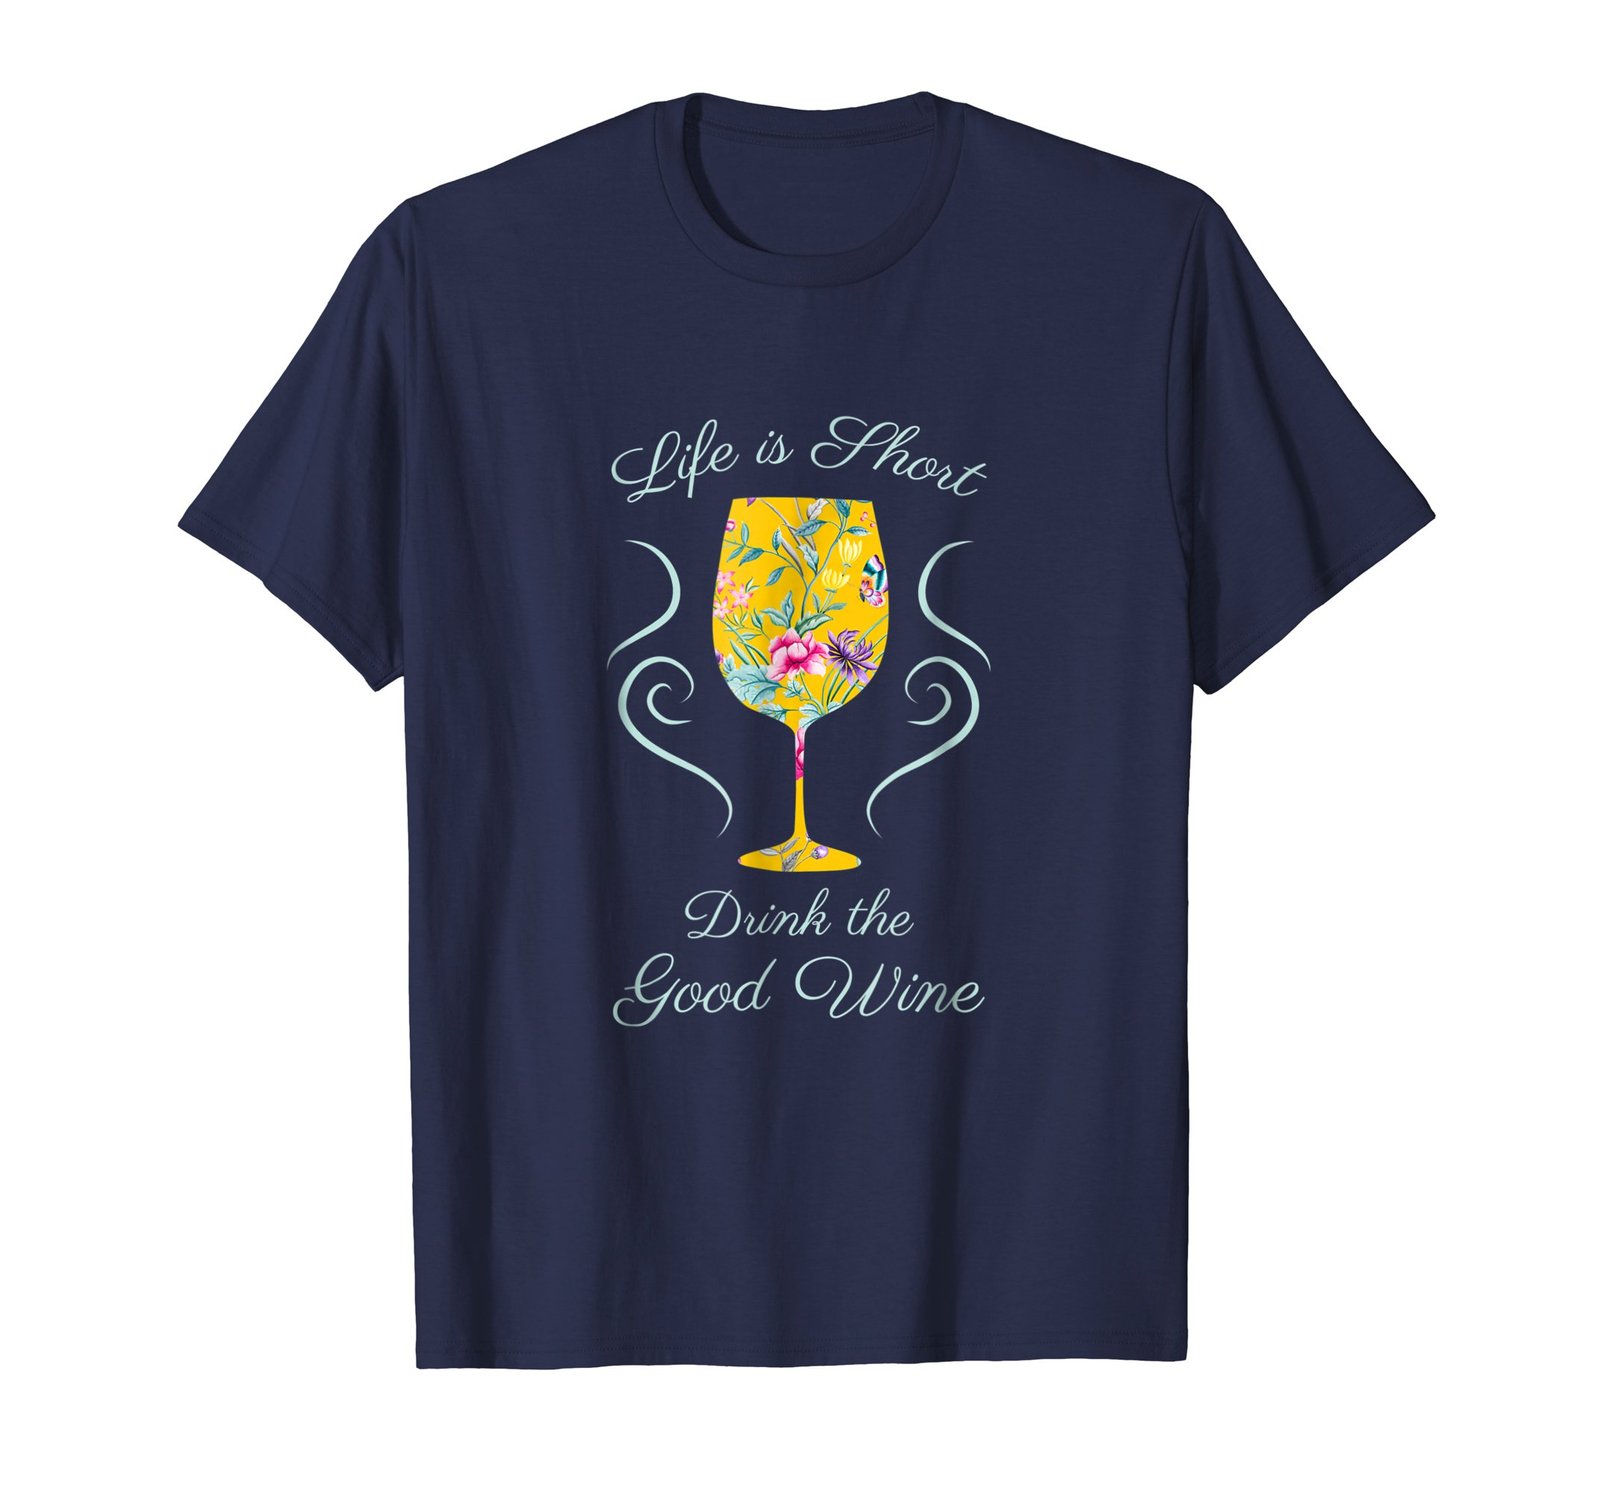 Funny Shirts - Life is Short Drink the Good Wine - T-Shirt for Wine Lovers Men